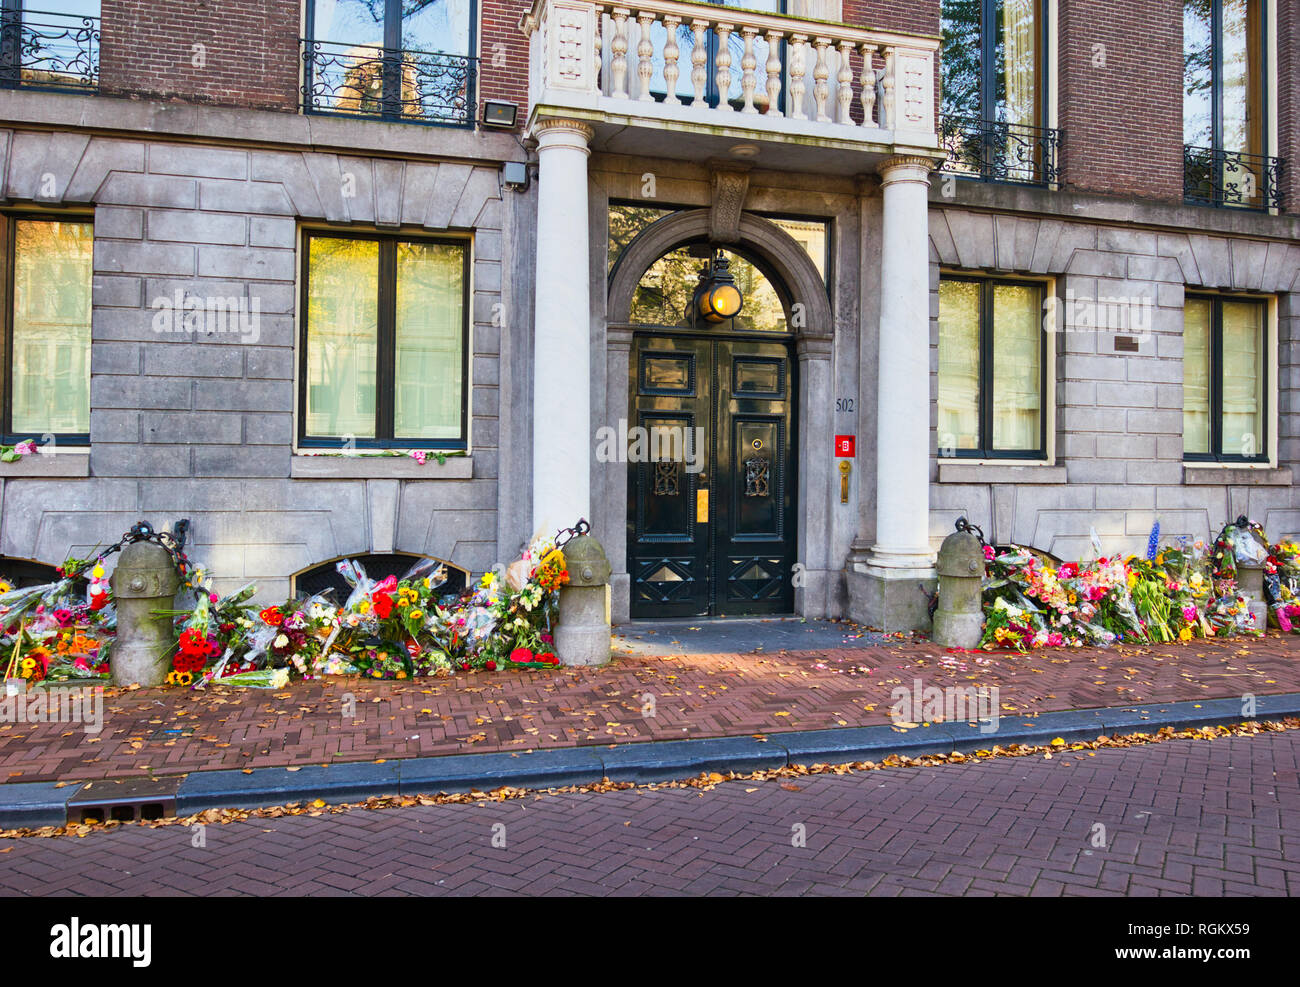 Floral tributes to Mayor Eberhard Van Der Laan outside his official residence after his death from lung cancer on October 5th 2017, Amsterdam, Holland Stock Photo